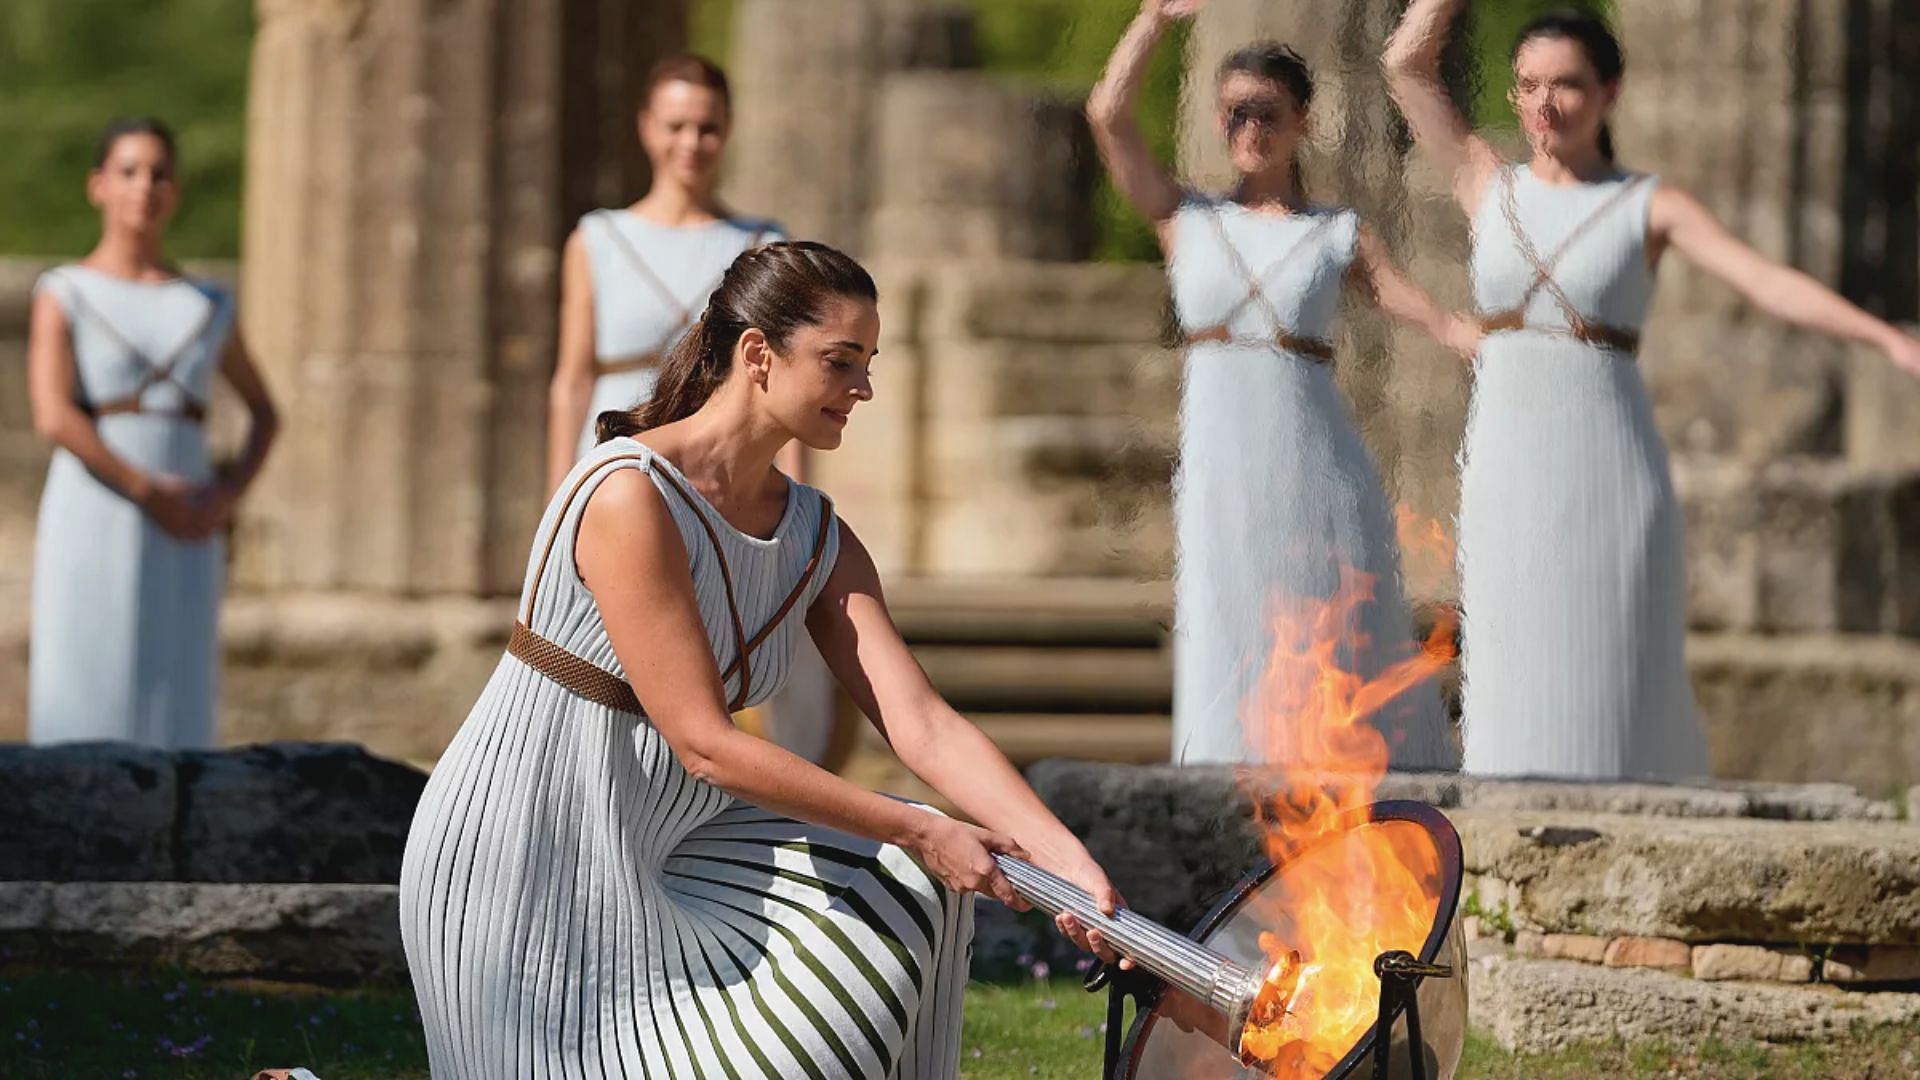 Olympics flame being lit in Ancient Olympia